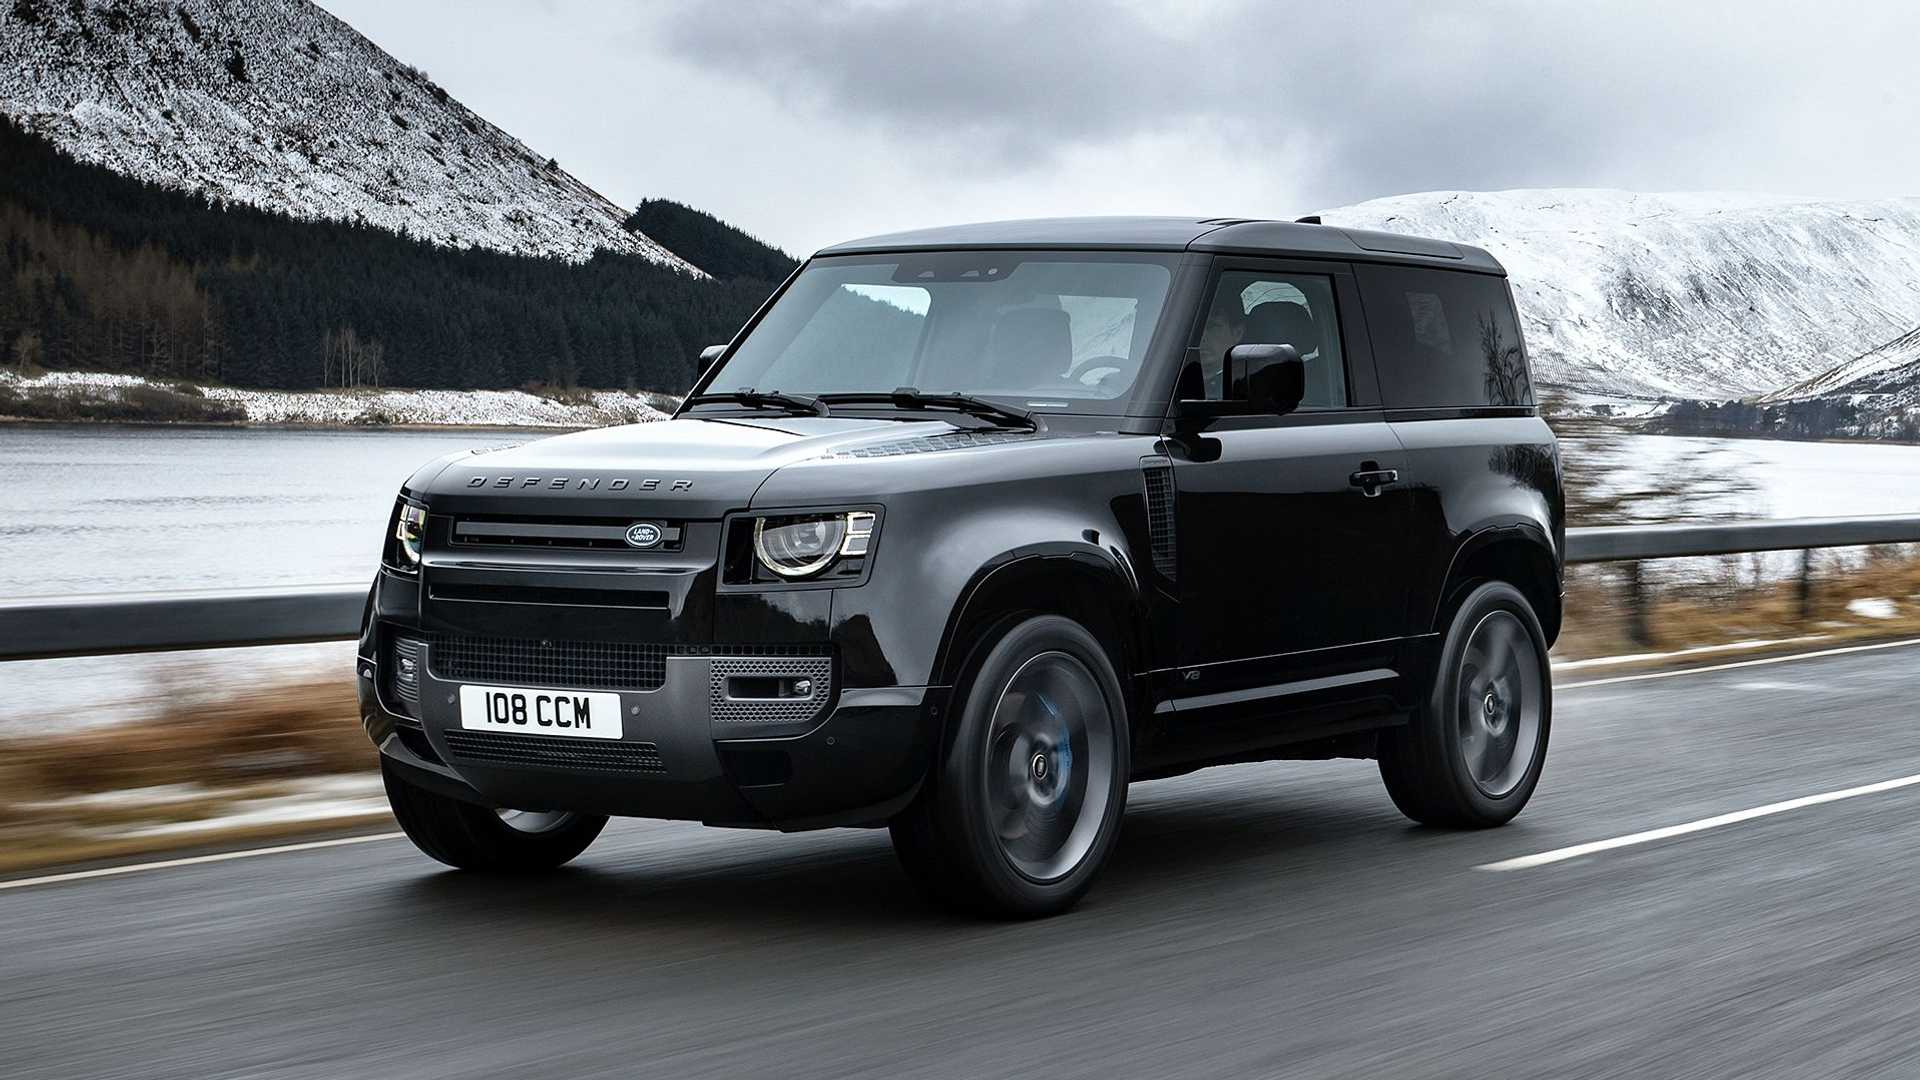 2023 Land Rover Defender SVR Rumored With BMW Twin-Turbo V8 Engine